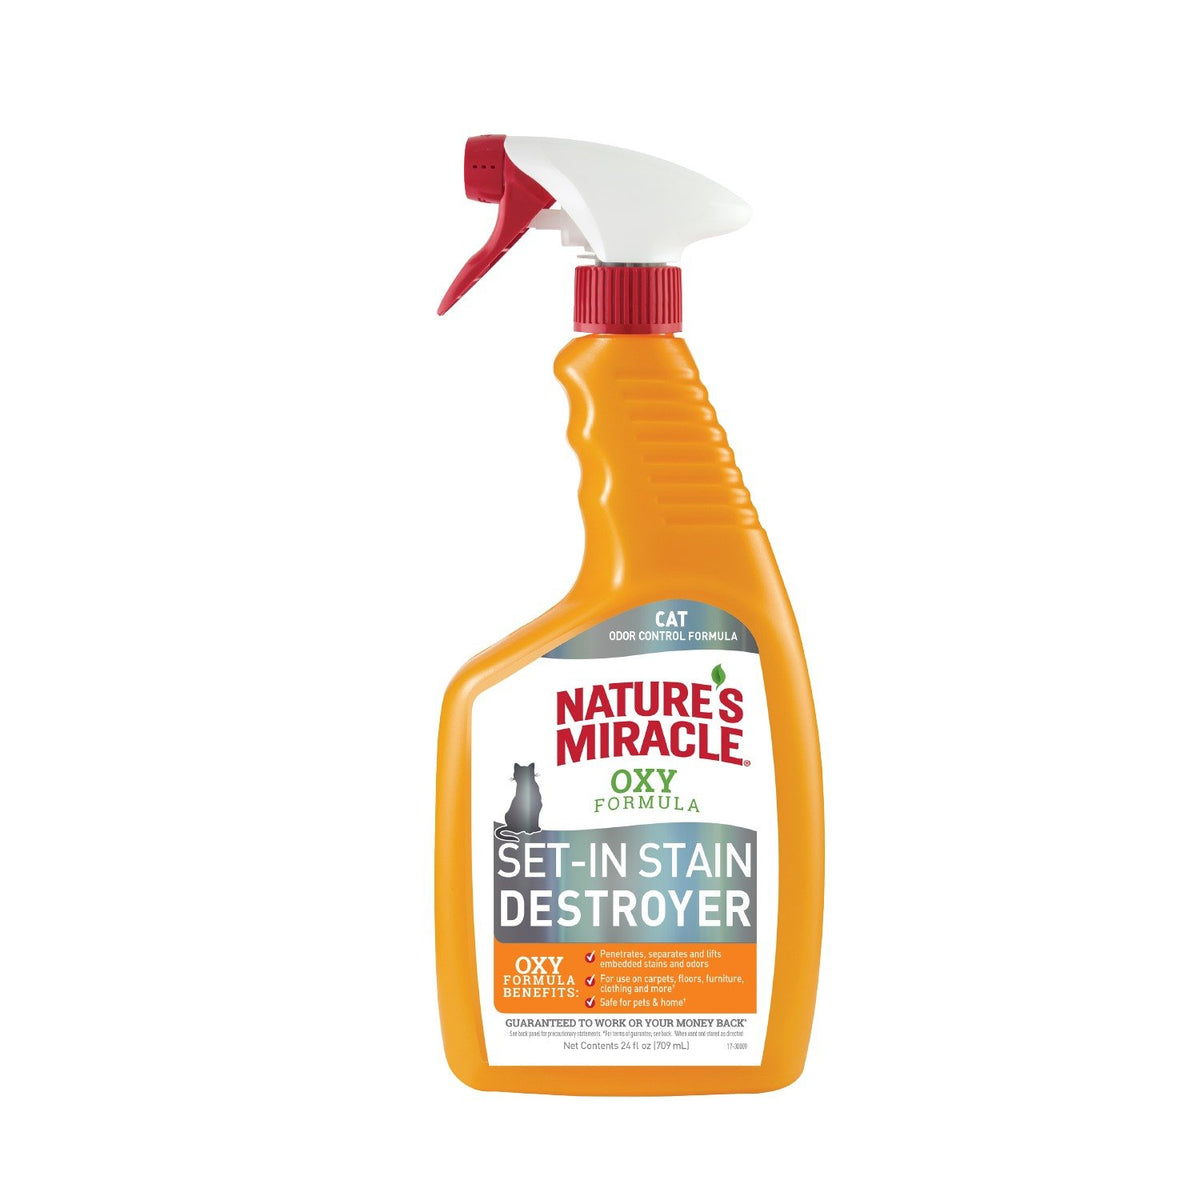 Nature's Miracle P-98170 Just for Cats Oxy Formula Stain & Odor Remover, 24 Oz